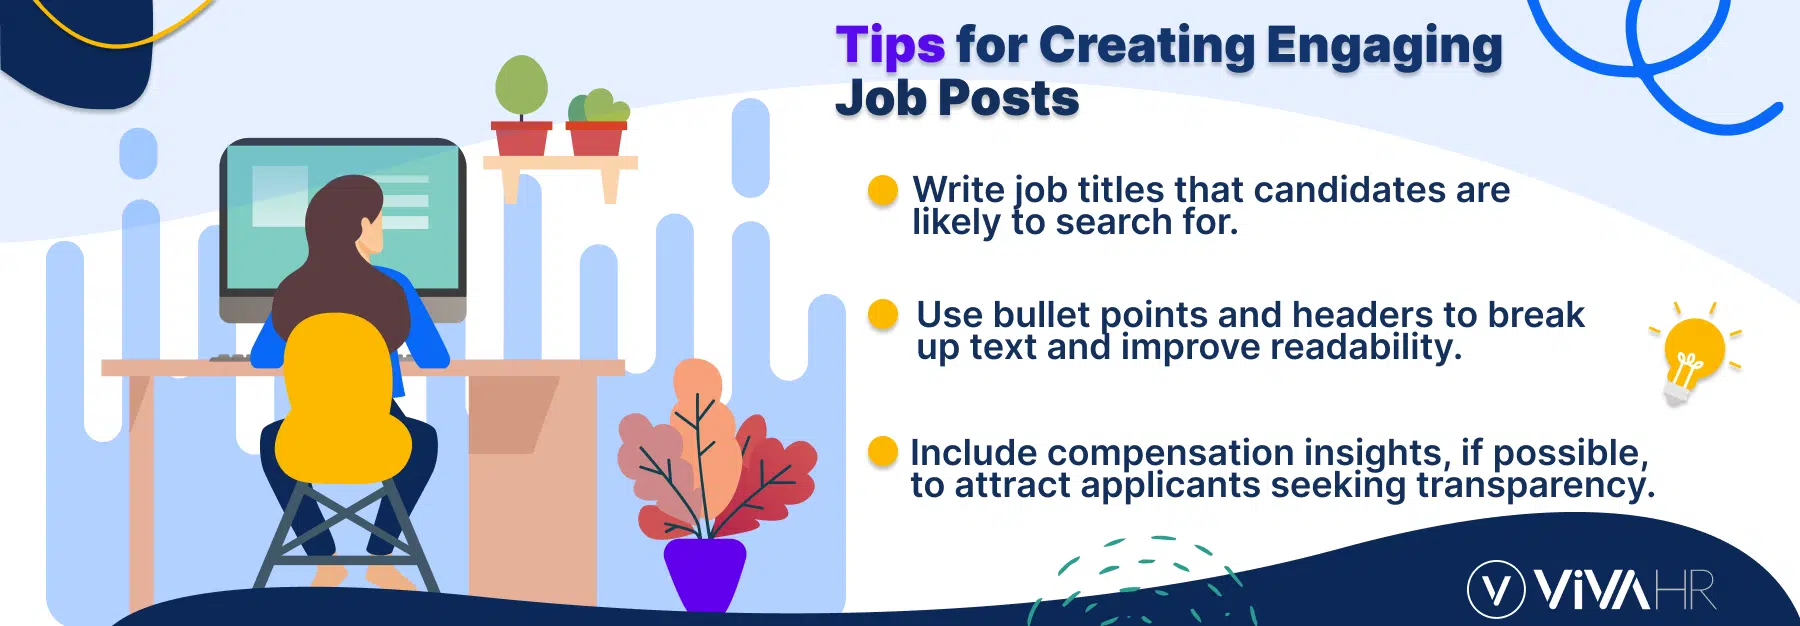 Tips For Creating Engaging Job Posts